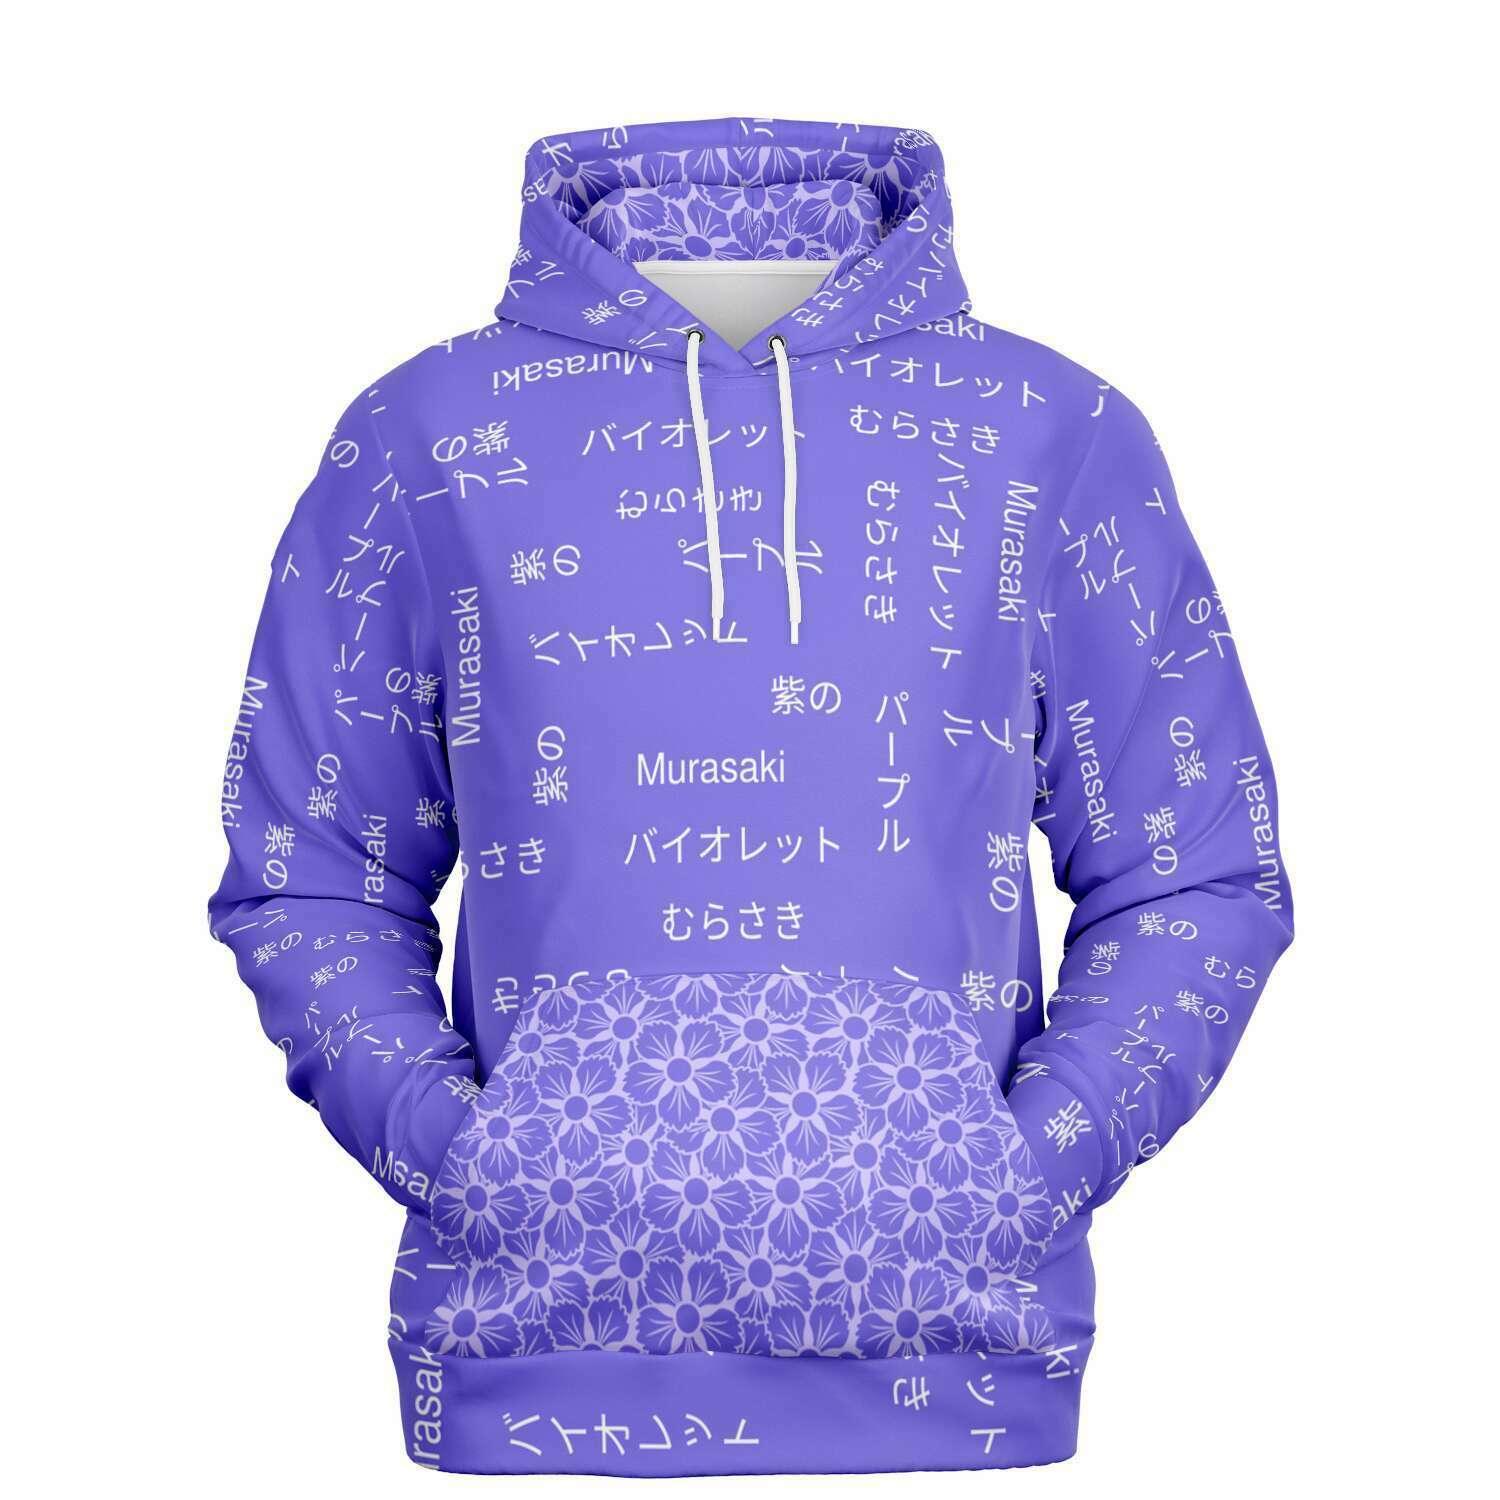 Light purple ( or lavender) Hoodie with written the word "purple" in white characters. The words are written in both Kanji, Hiragana, Katakana and romanji. The front pocket and the inside of the hood have the same origami type pattern in purple and white